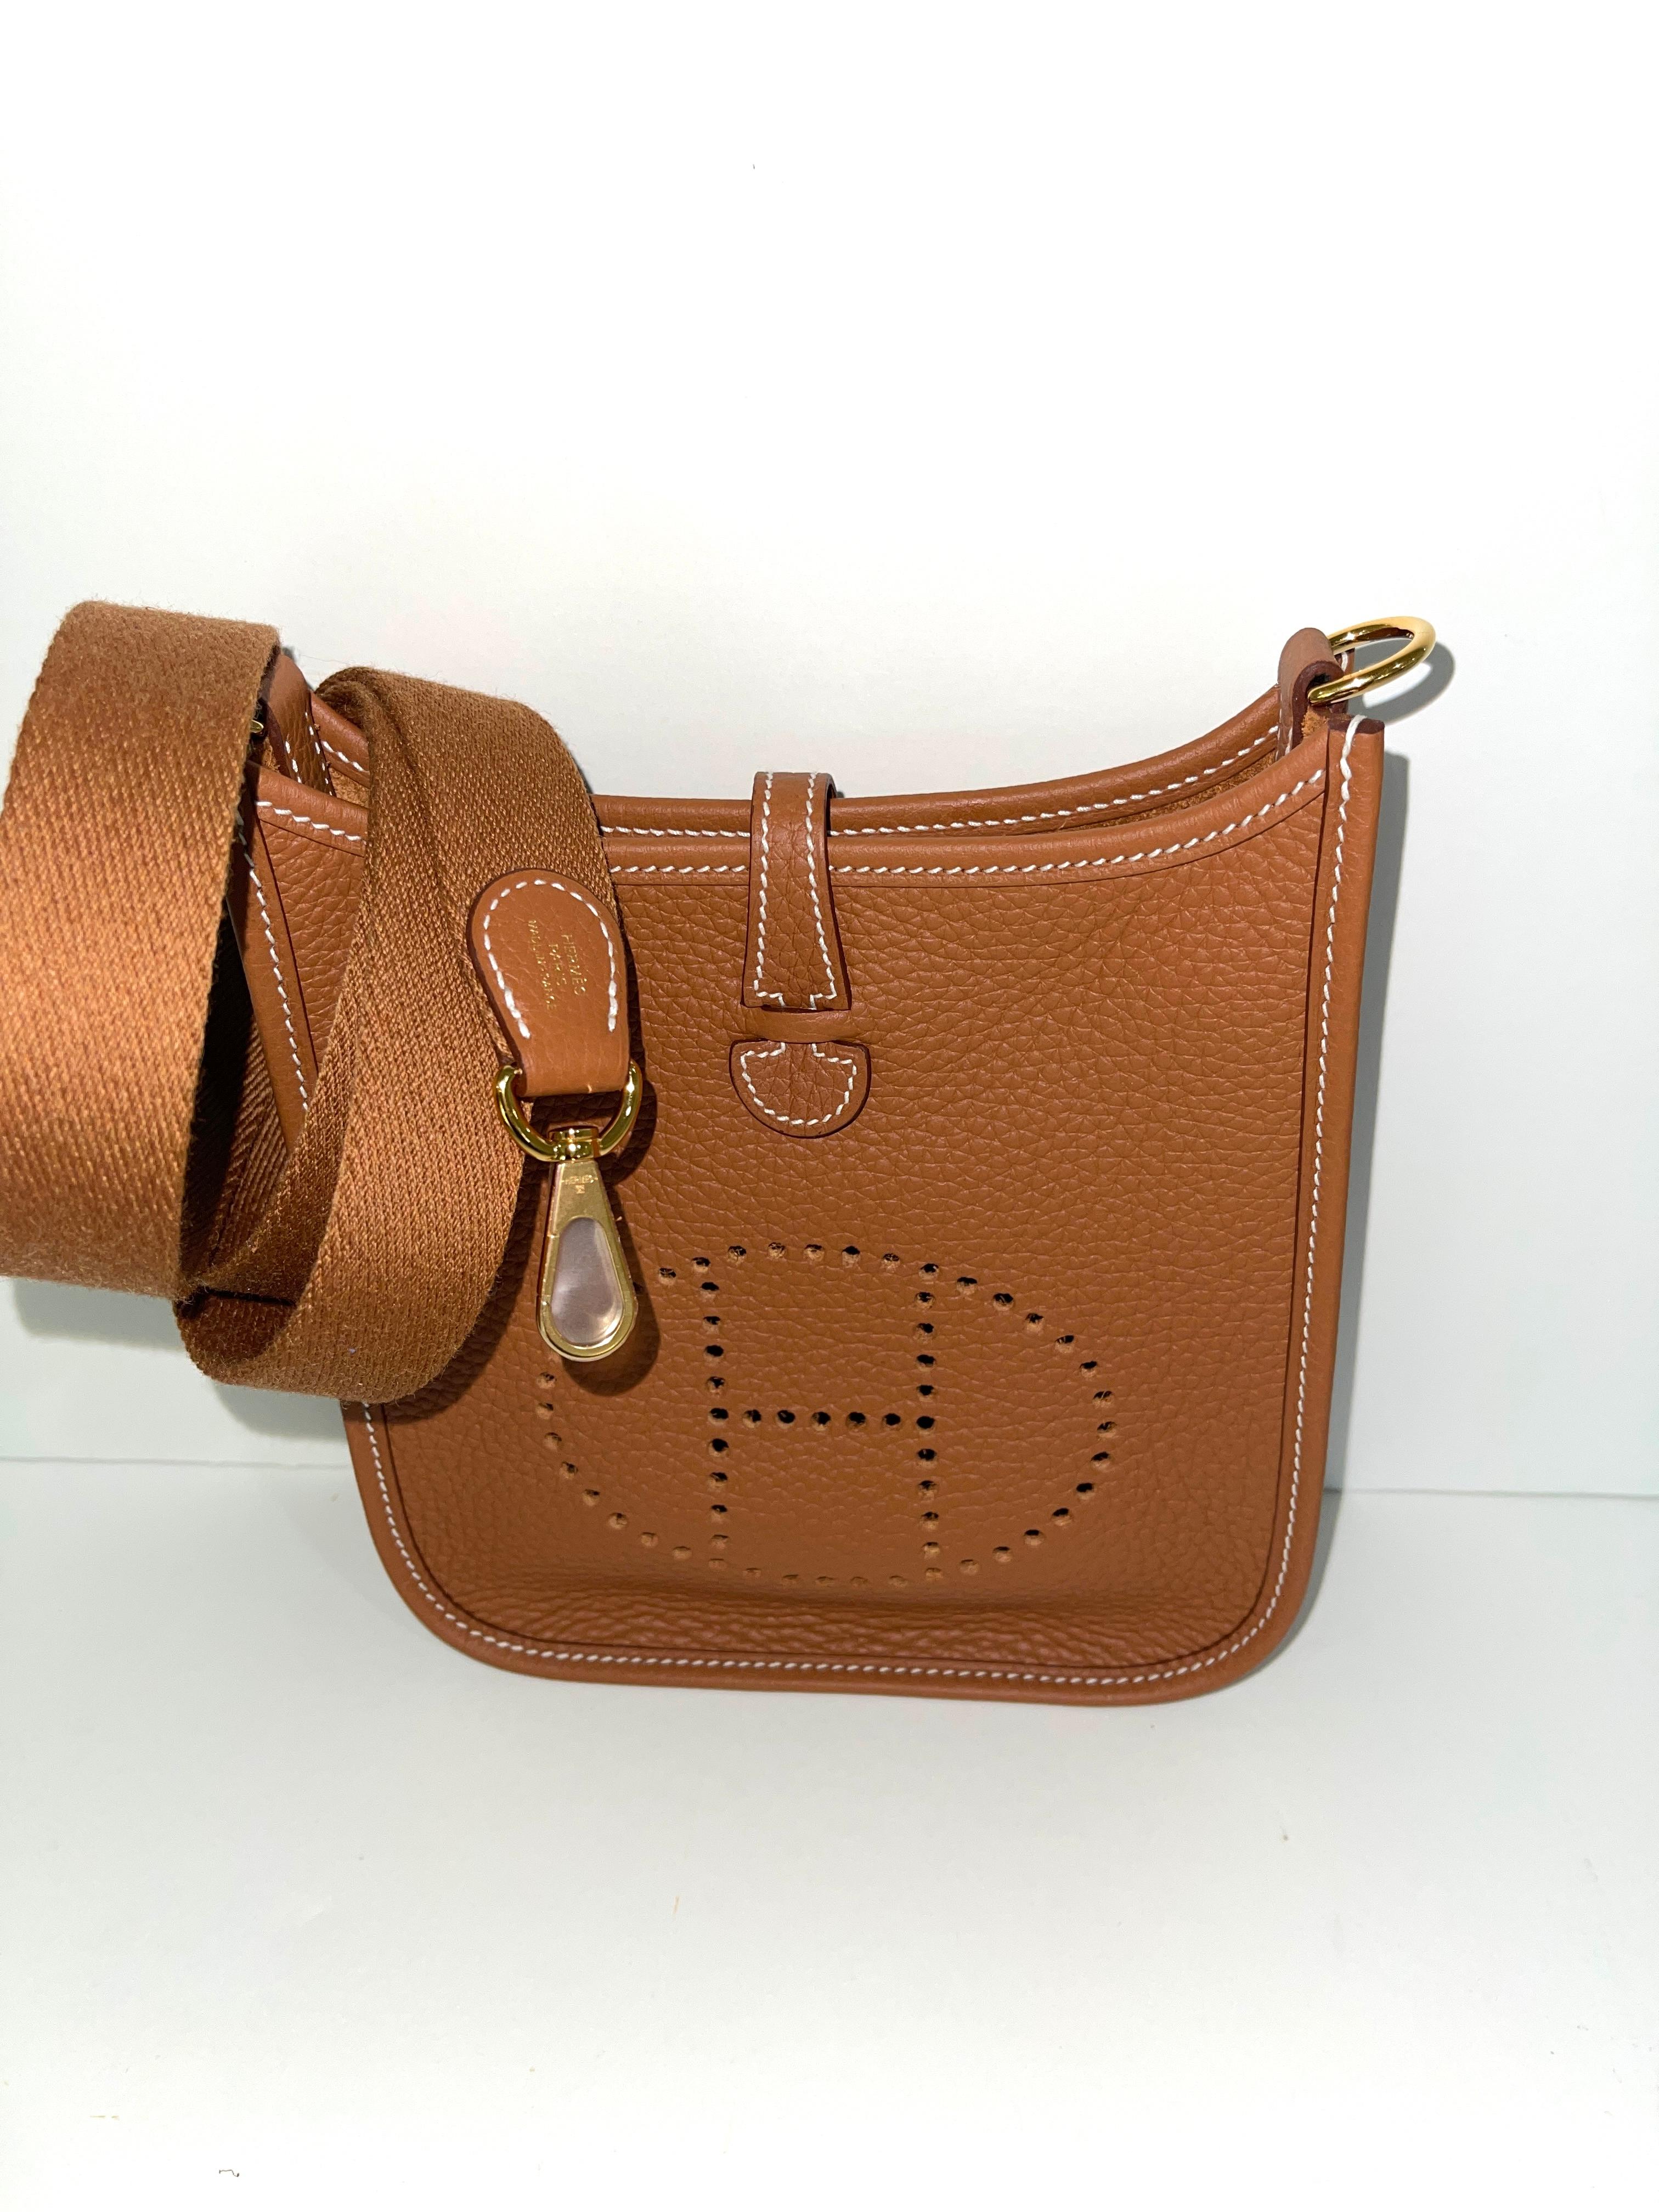 Hermès Evelyne 16 TPM Gold Bag Gold Hardware New In New Condition For Sale In West Chester, PA